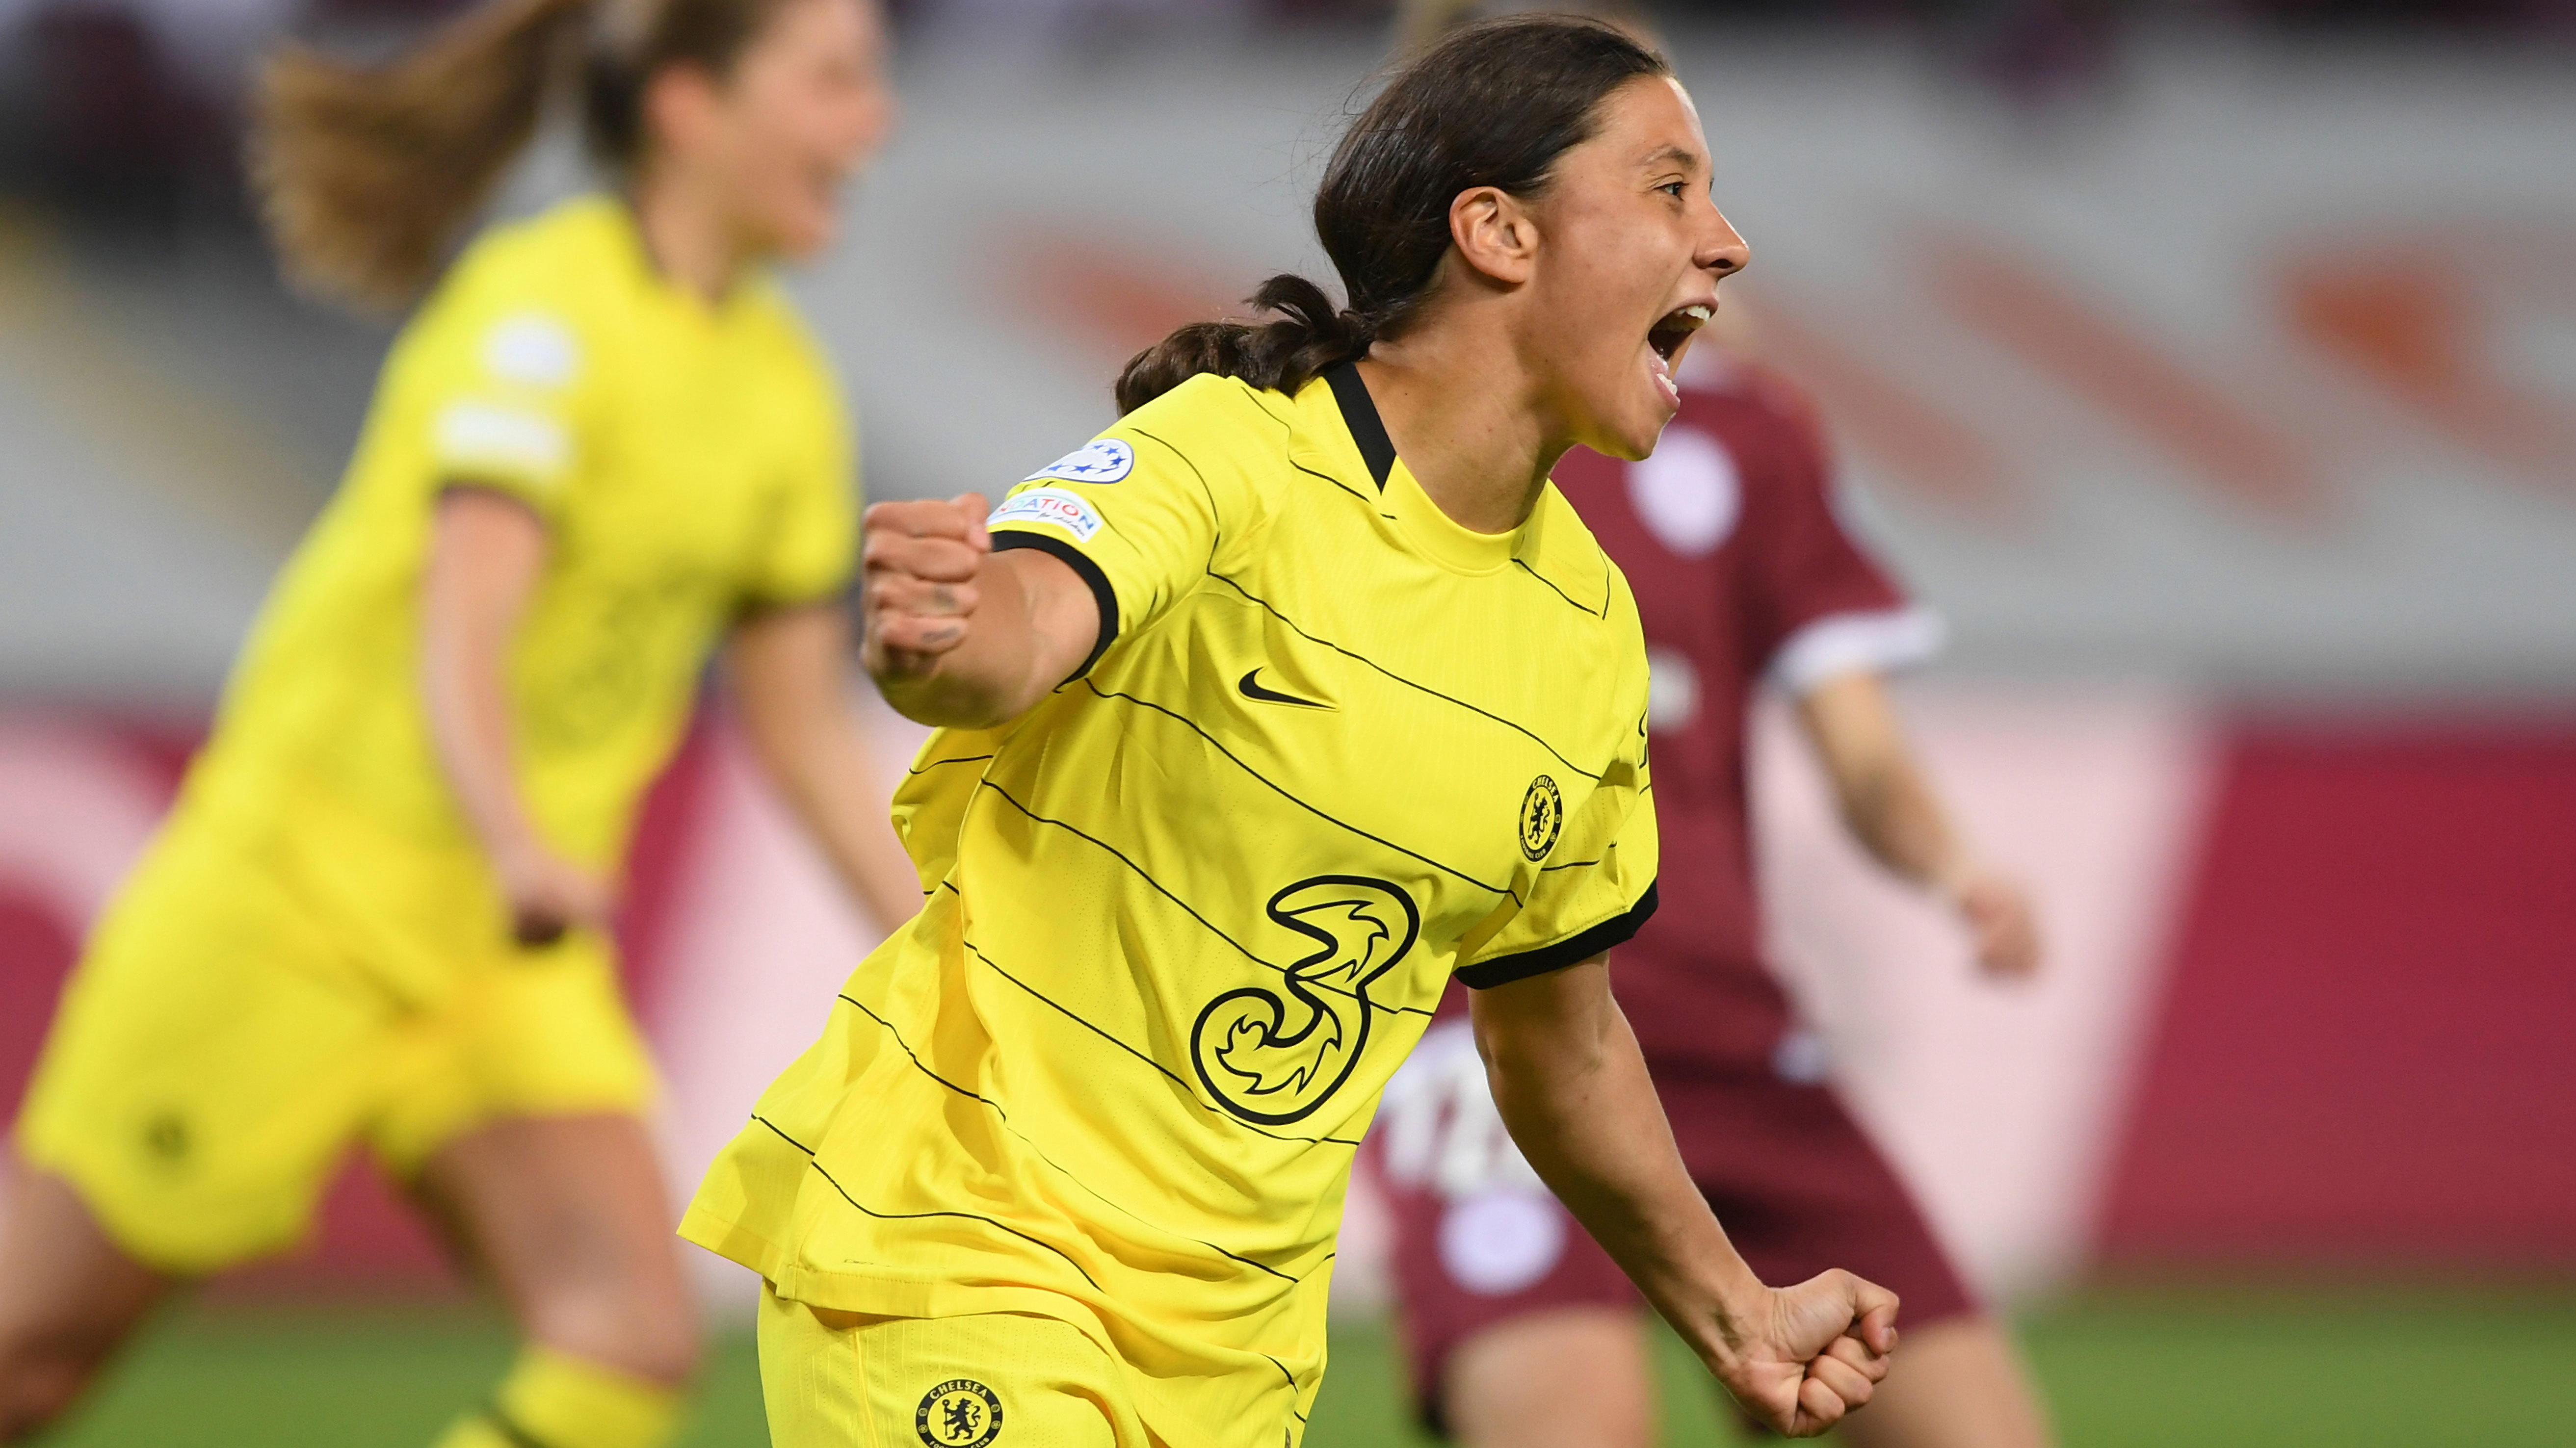 Sam Kerr of Chelsea celebrates after her team's first goal during their UEFA Women's Champions League match against Servette.